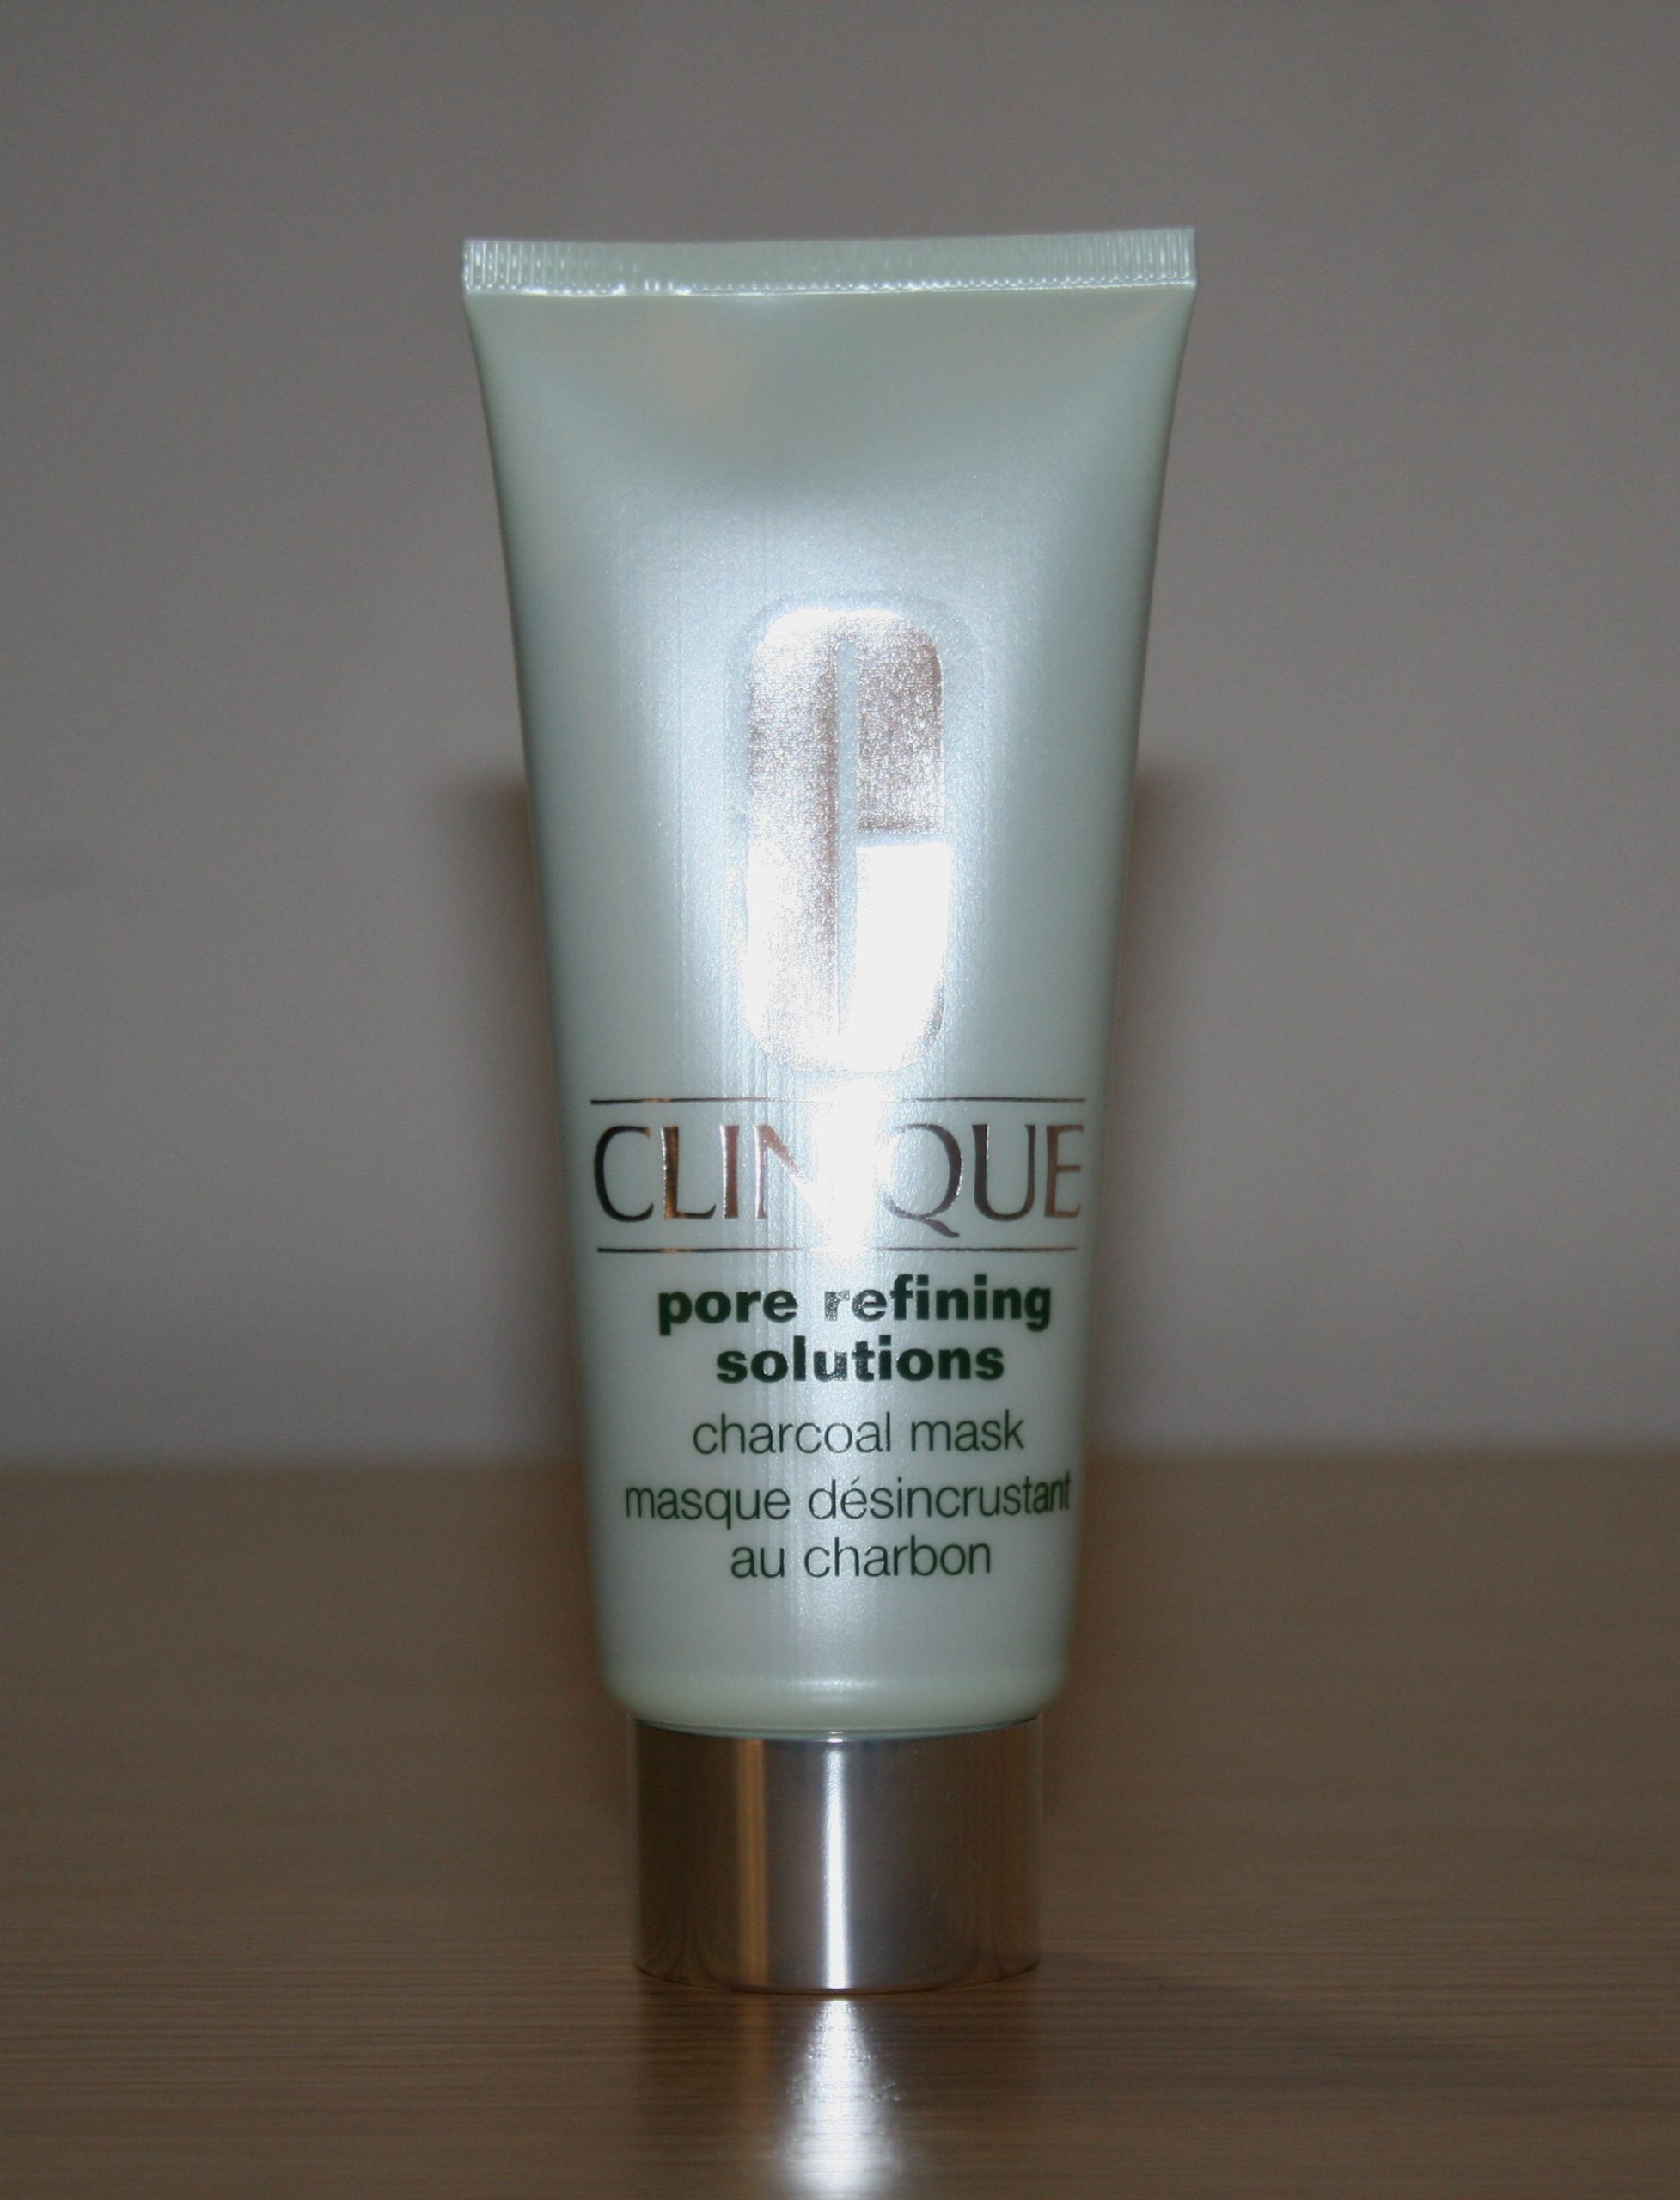 Mask Monday: Clinique Pore Refining Solutions Charcoal Mask